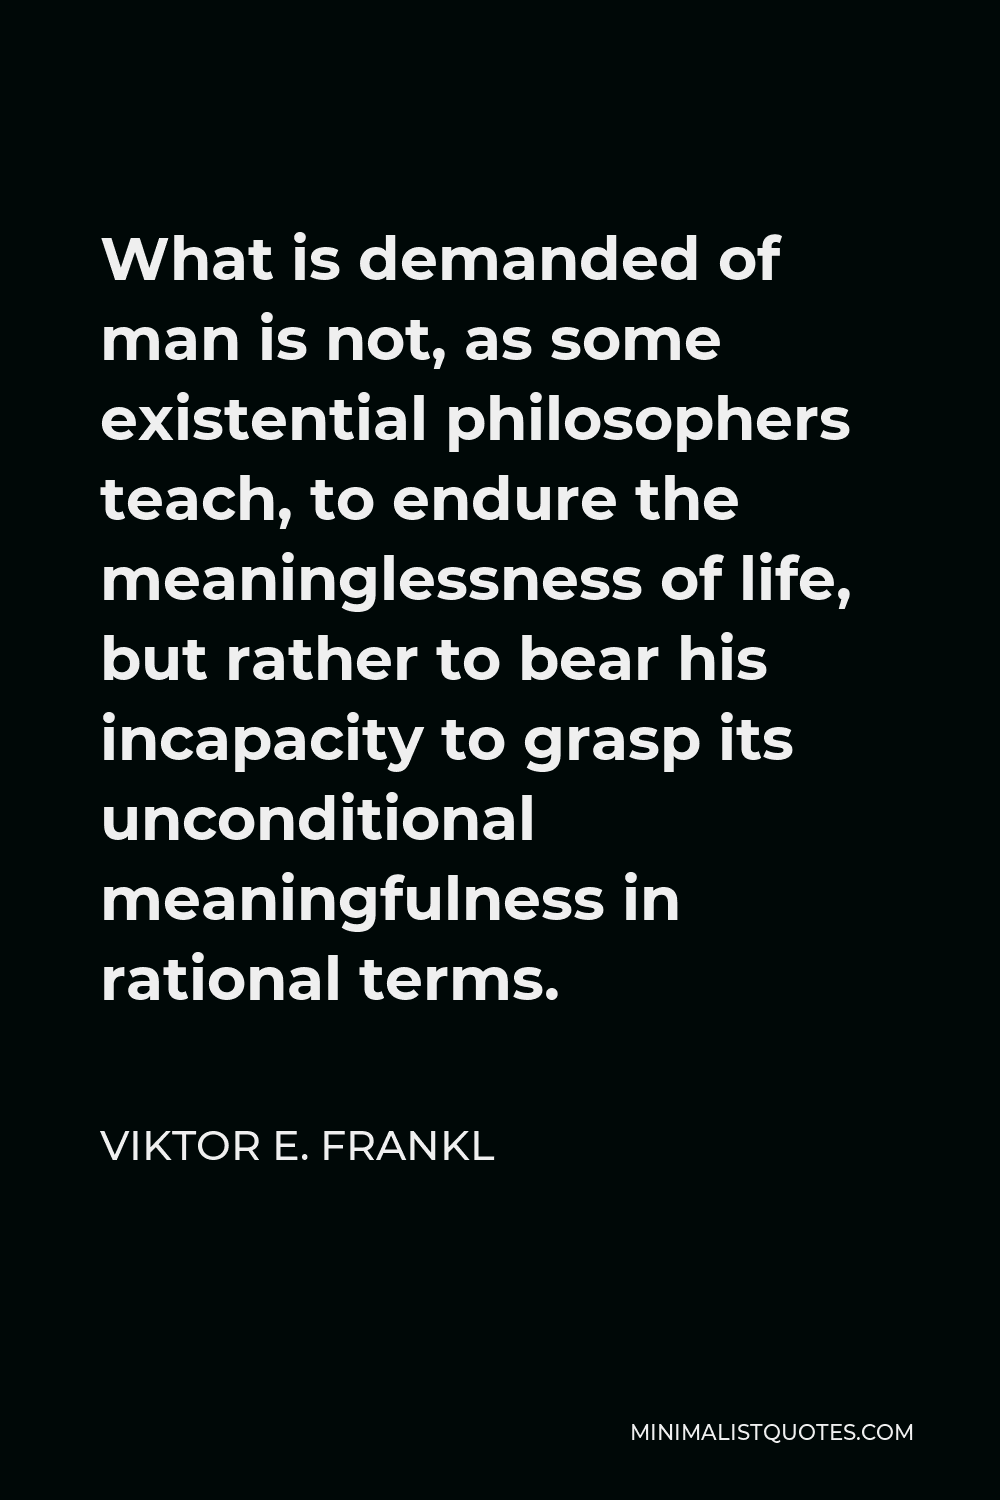 Viktor E. Frankl Quote - What is demanded of man is not, as some existential philosophers teach, to endure the meaninglessness of life, but rather to bear his incapacity to grasp its unconditional meaningfulness in rational terms.